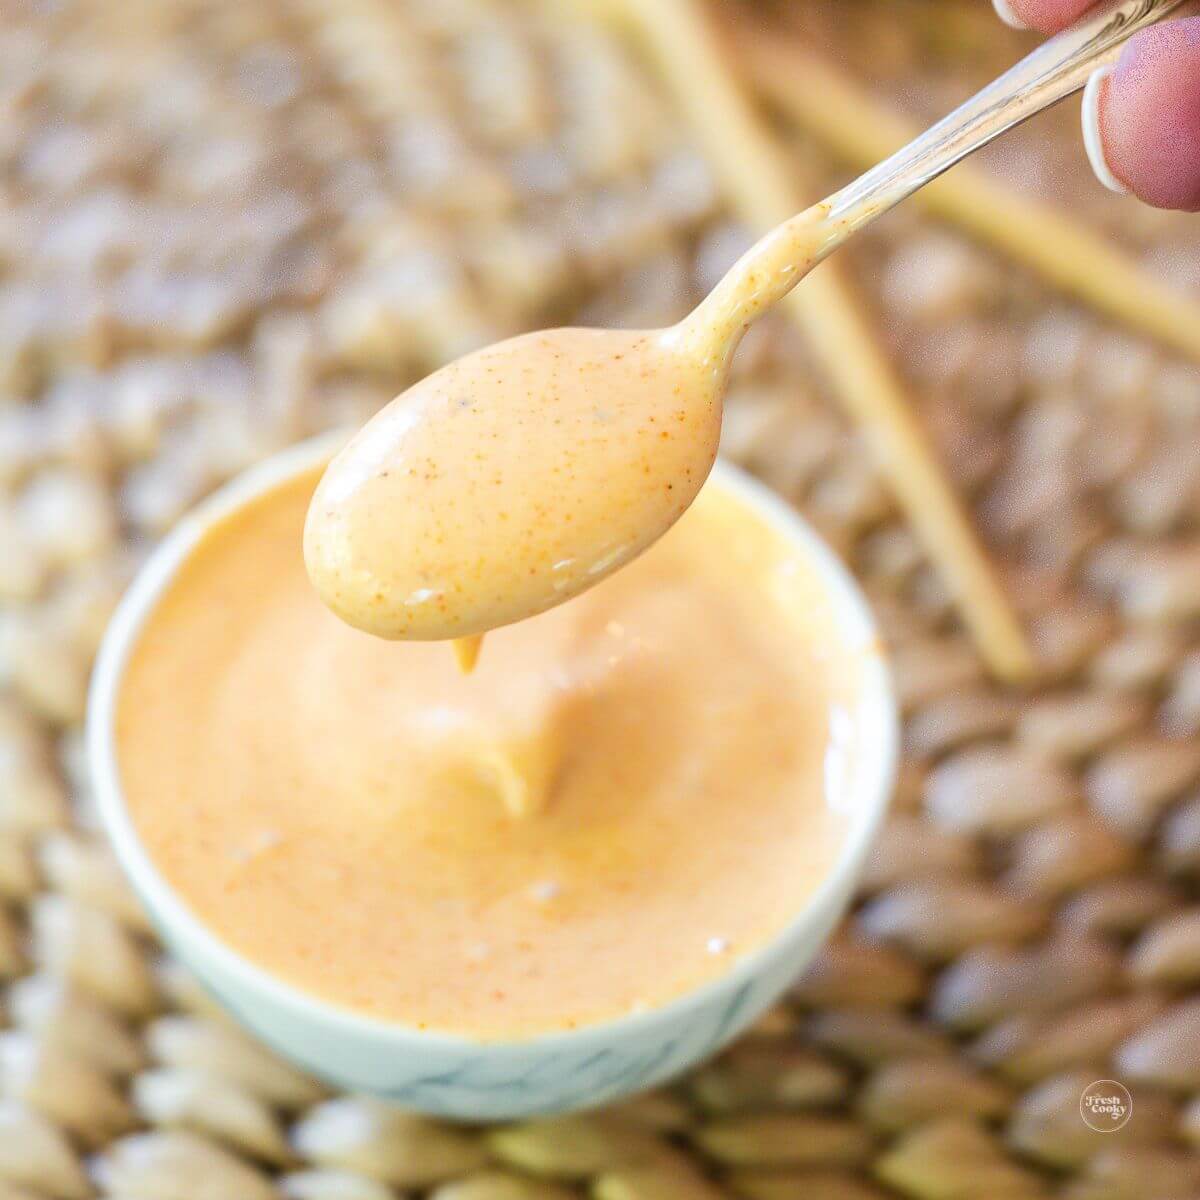 Yum yum sauce in small bowl with spoon holding the creamy hibachi sauce.